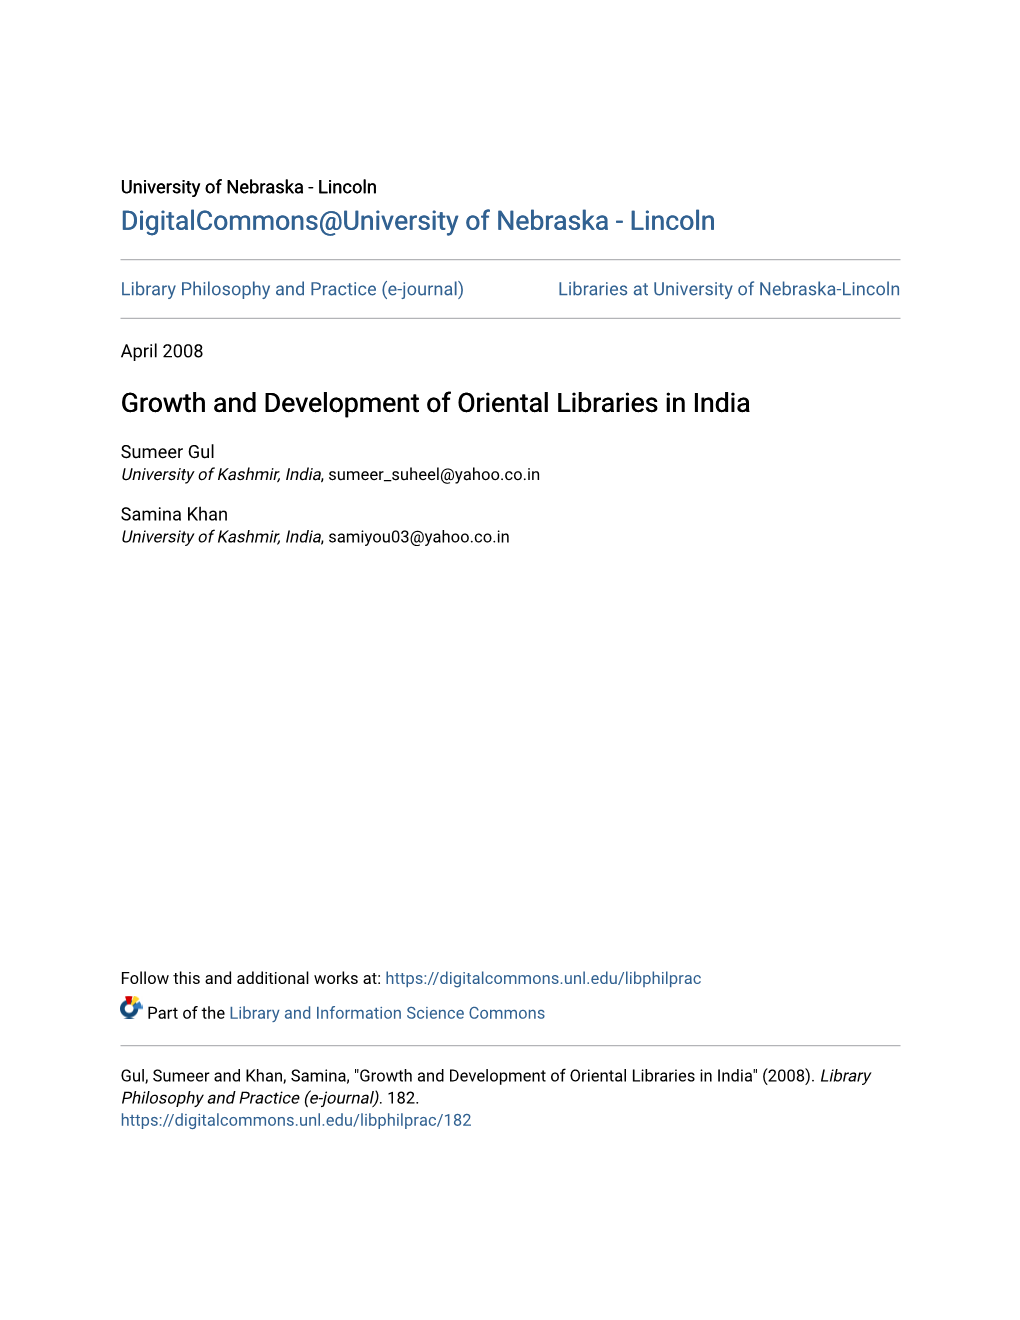 Growth and Development of Oriental Libraries in India